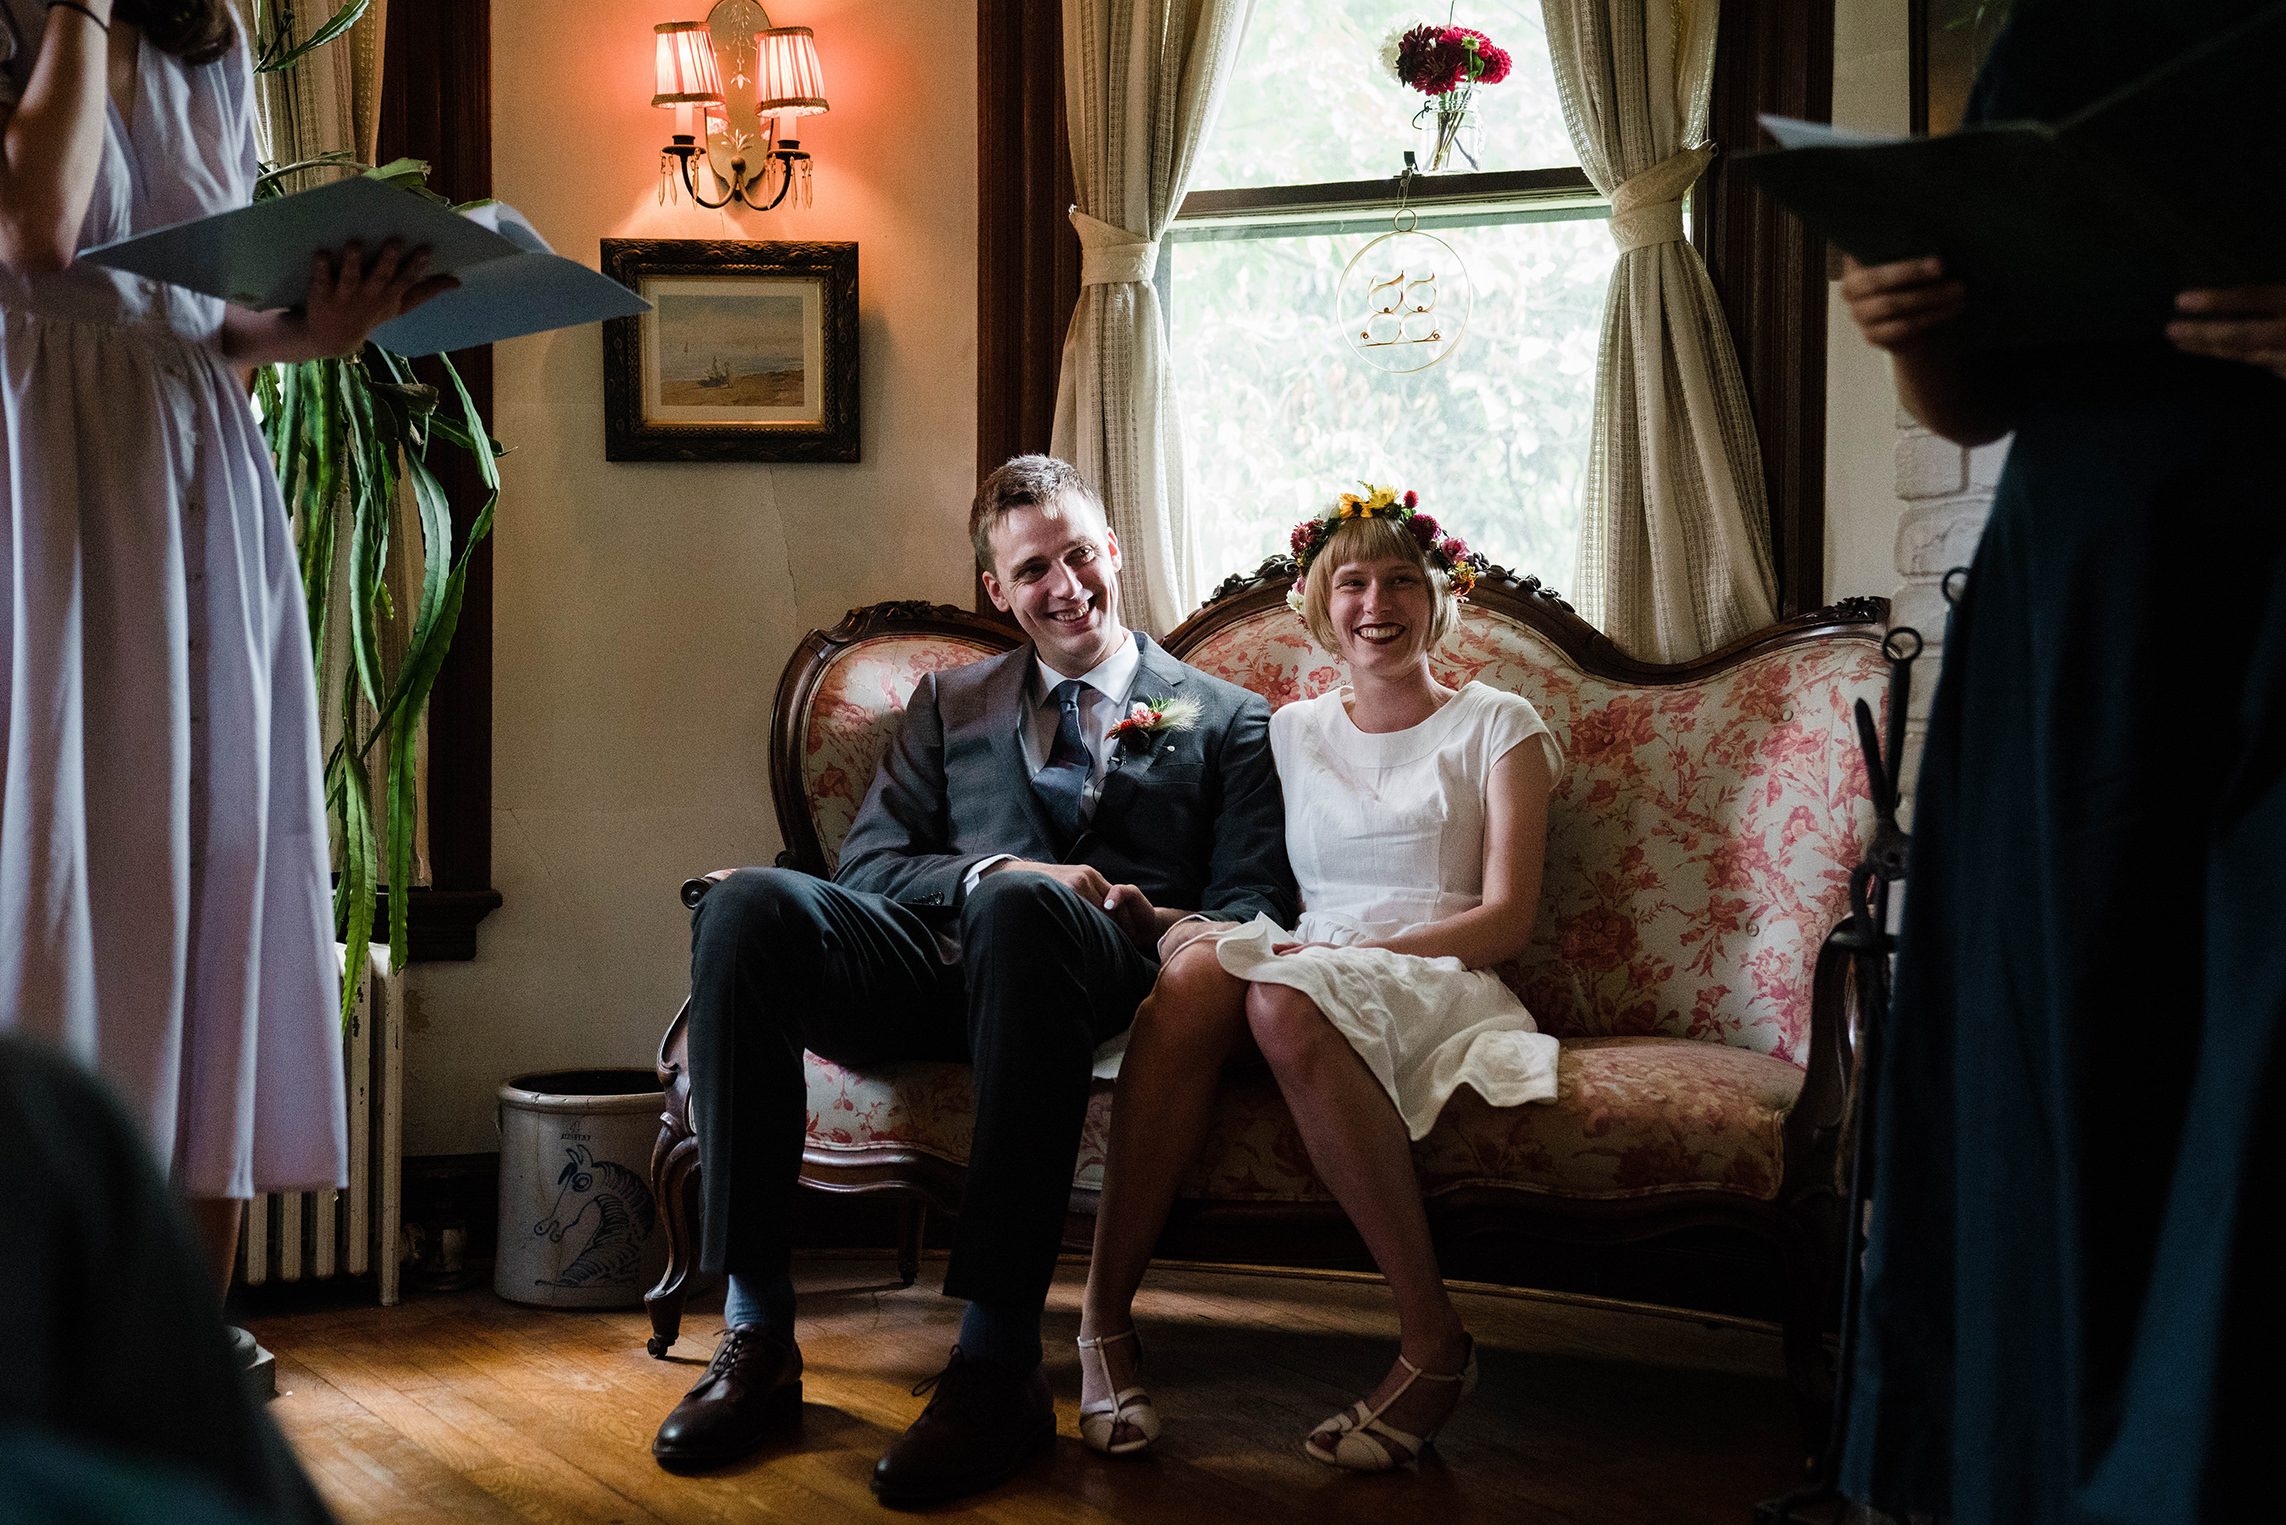 A documentary photograph featured in the best of wedding photography of 2019 showing a couple laughing during their intimate wedding ceremony at home